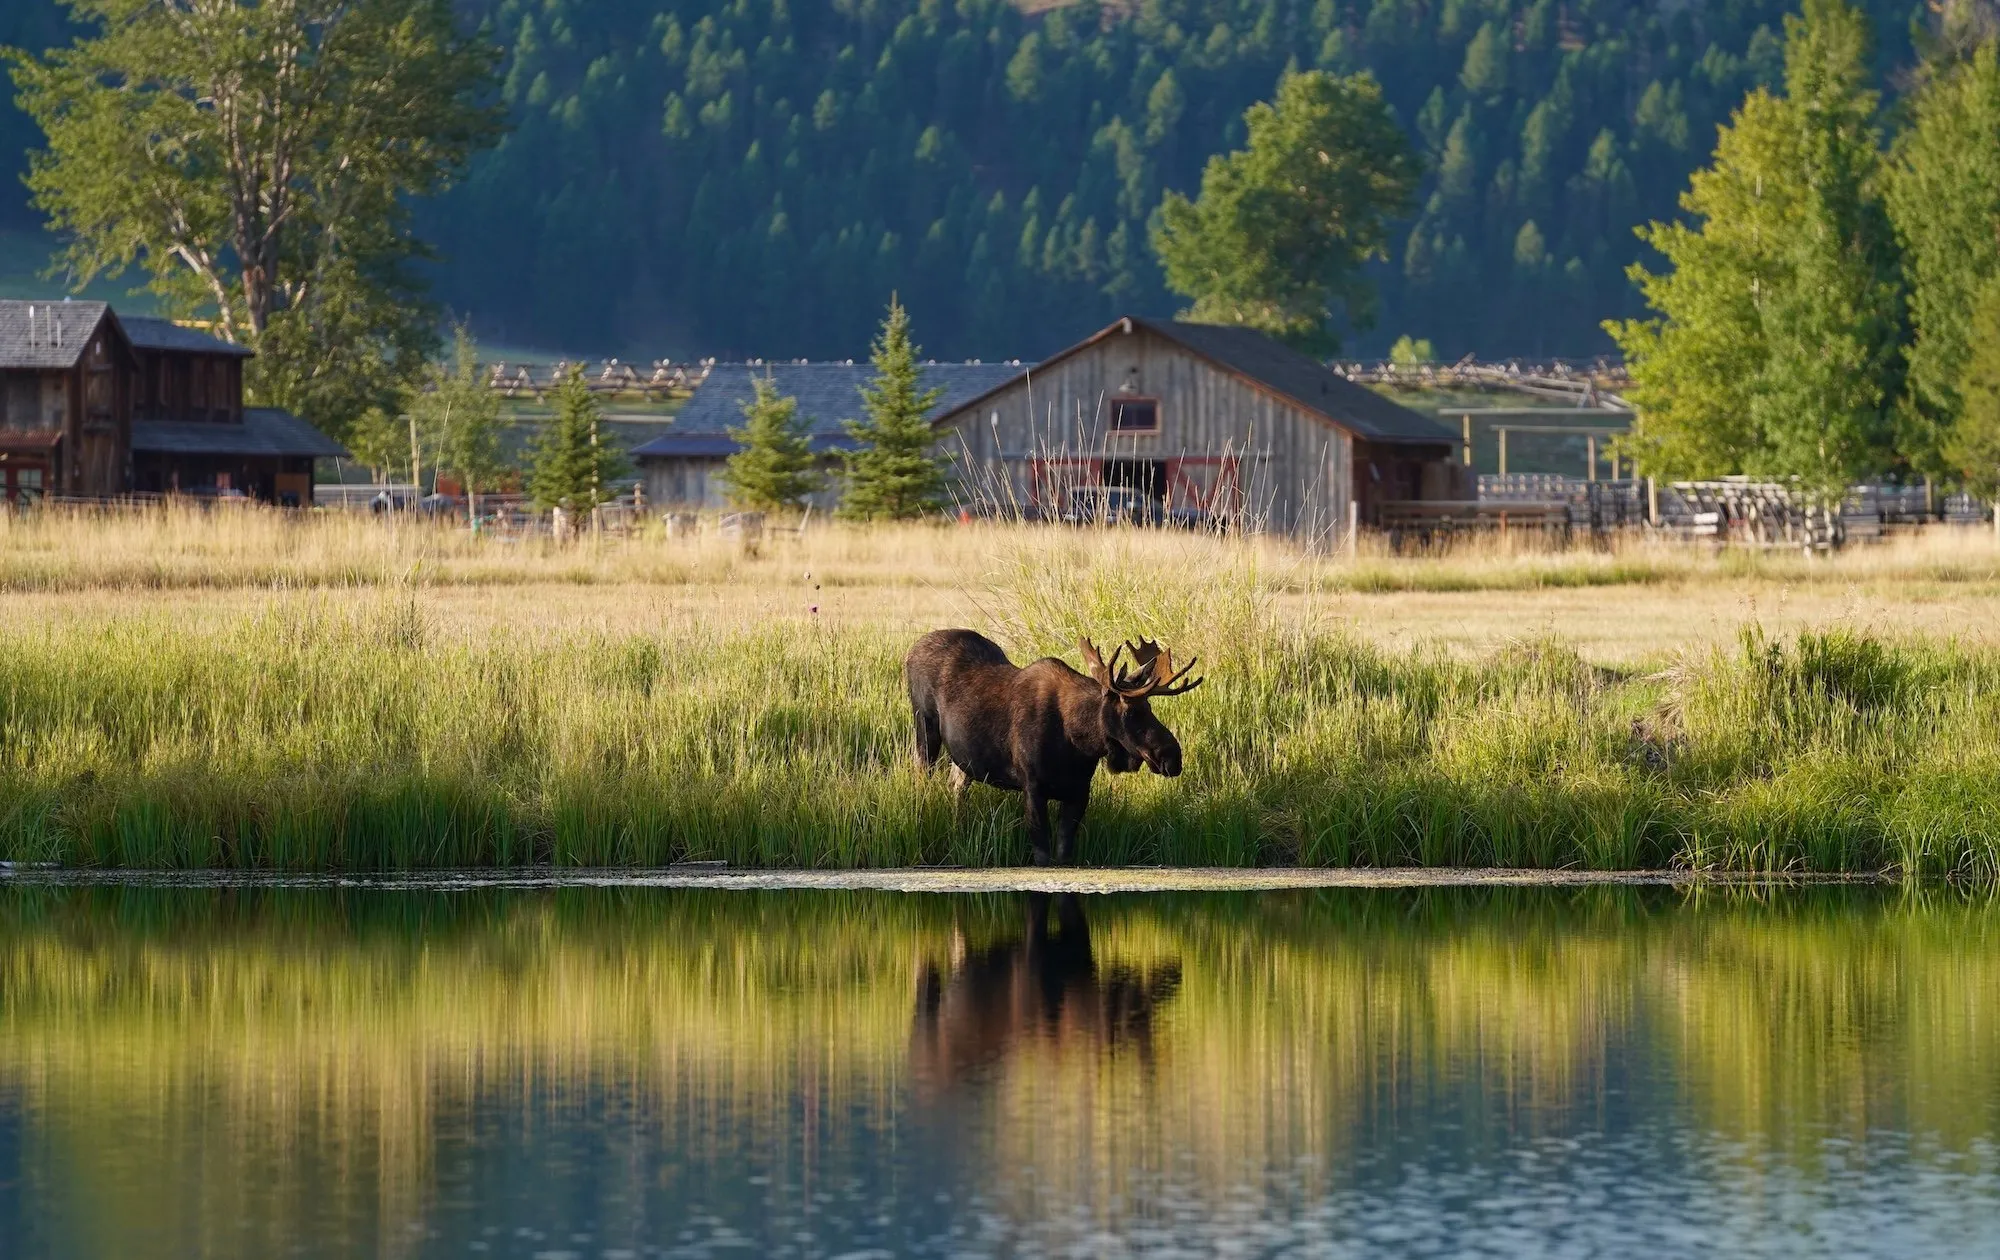 A moose by the water